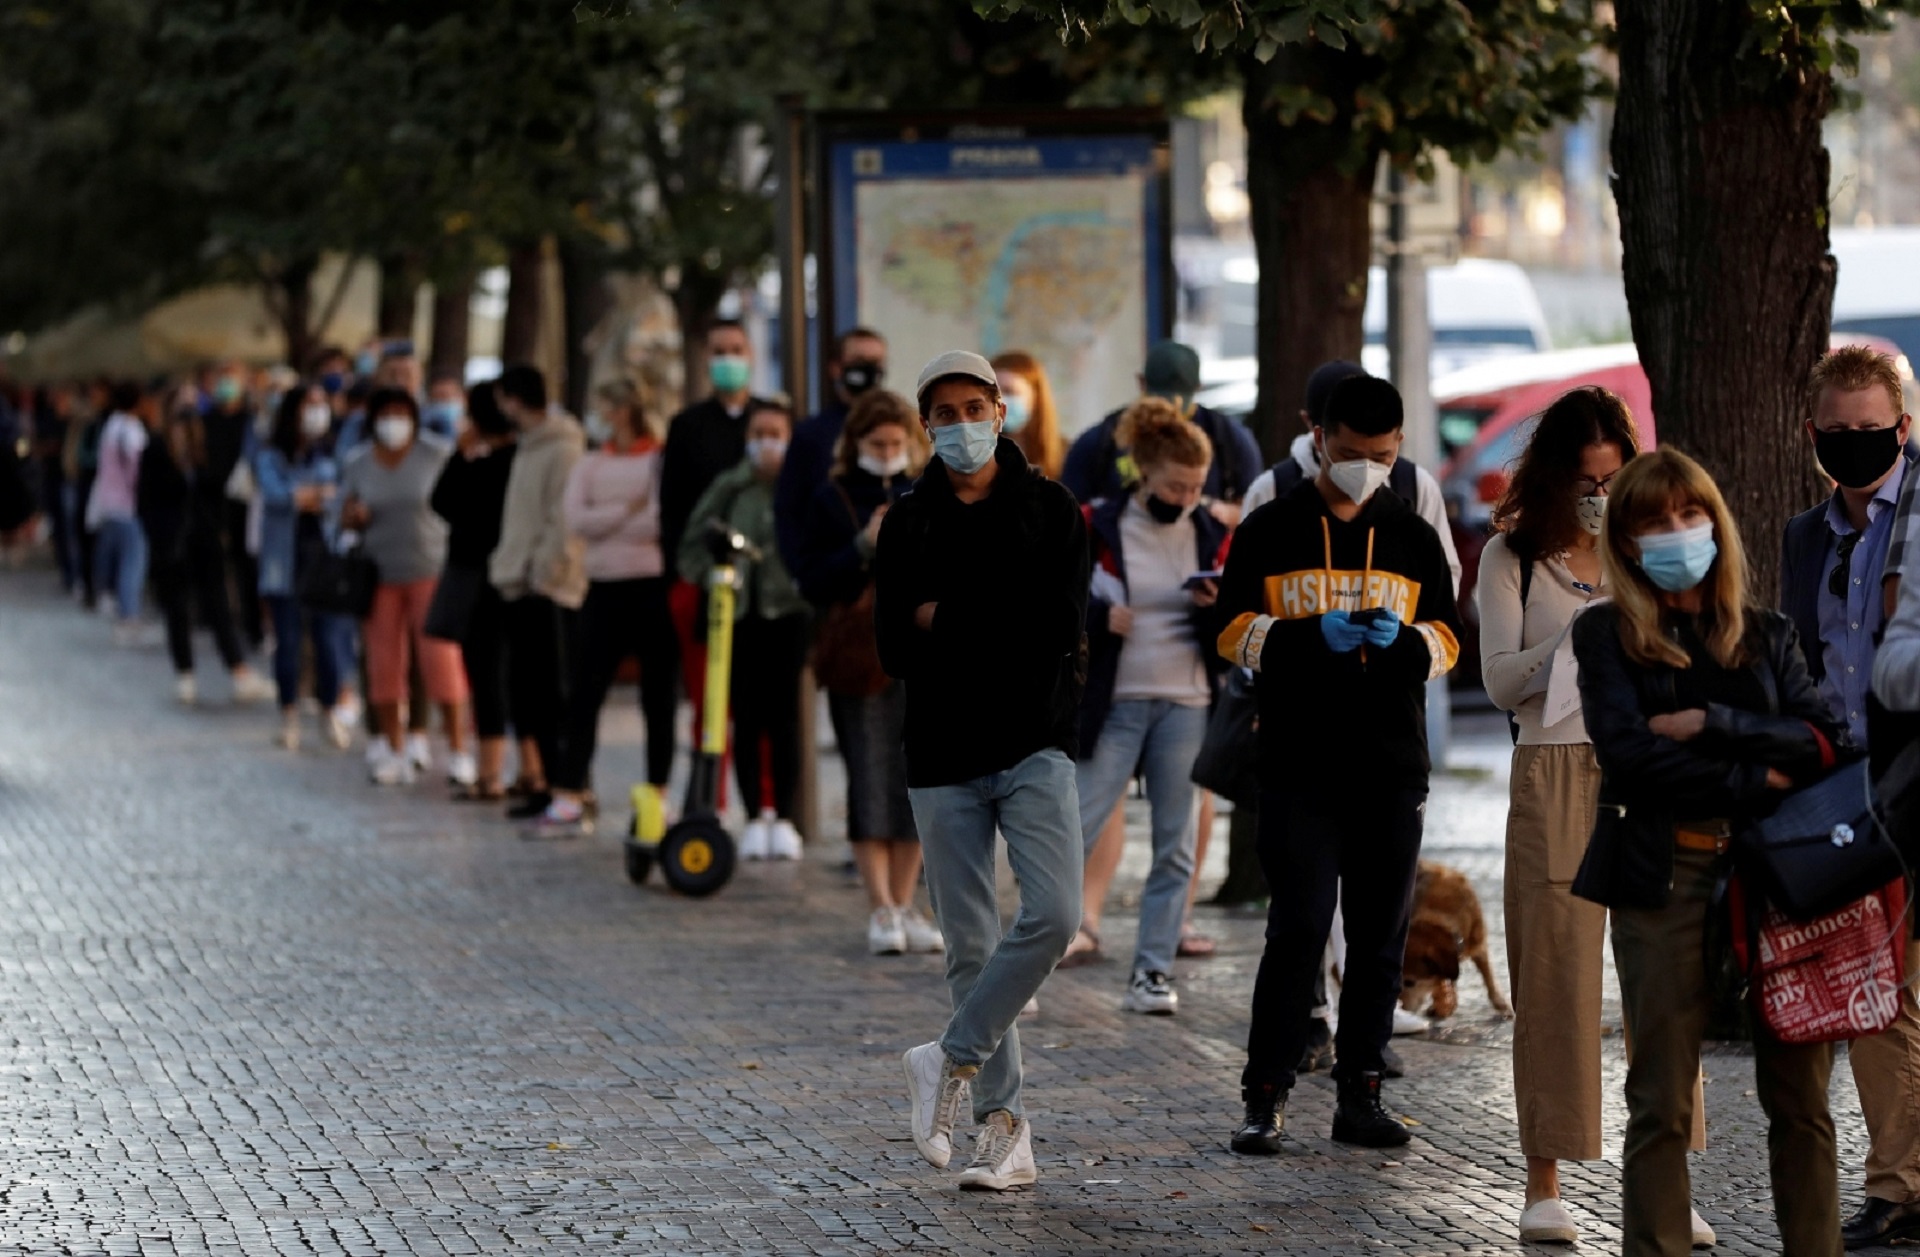 People wait in a line to get tested for the coronavirus disease in Prague People wait in a line to get tested for the coronavirus disease (COVID-19) before a sampling station opens at Wenceslas Square in Prague, Czech Republic, September 16, 2020.     REUTERS/David W Cerny DAVID W CERNY